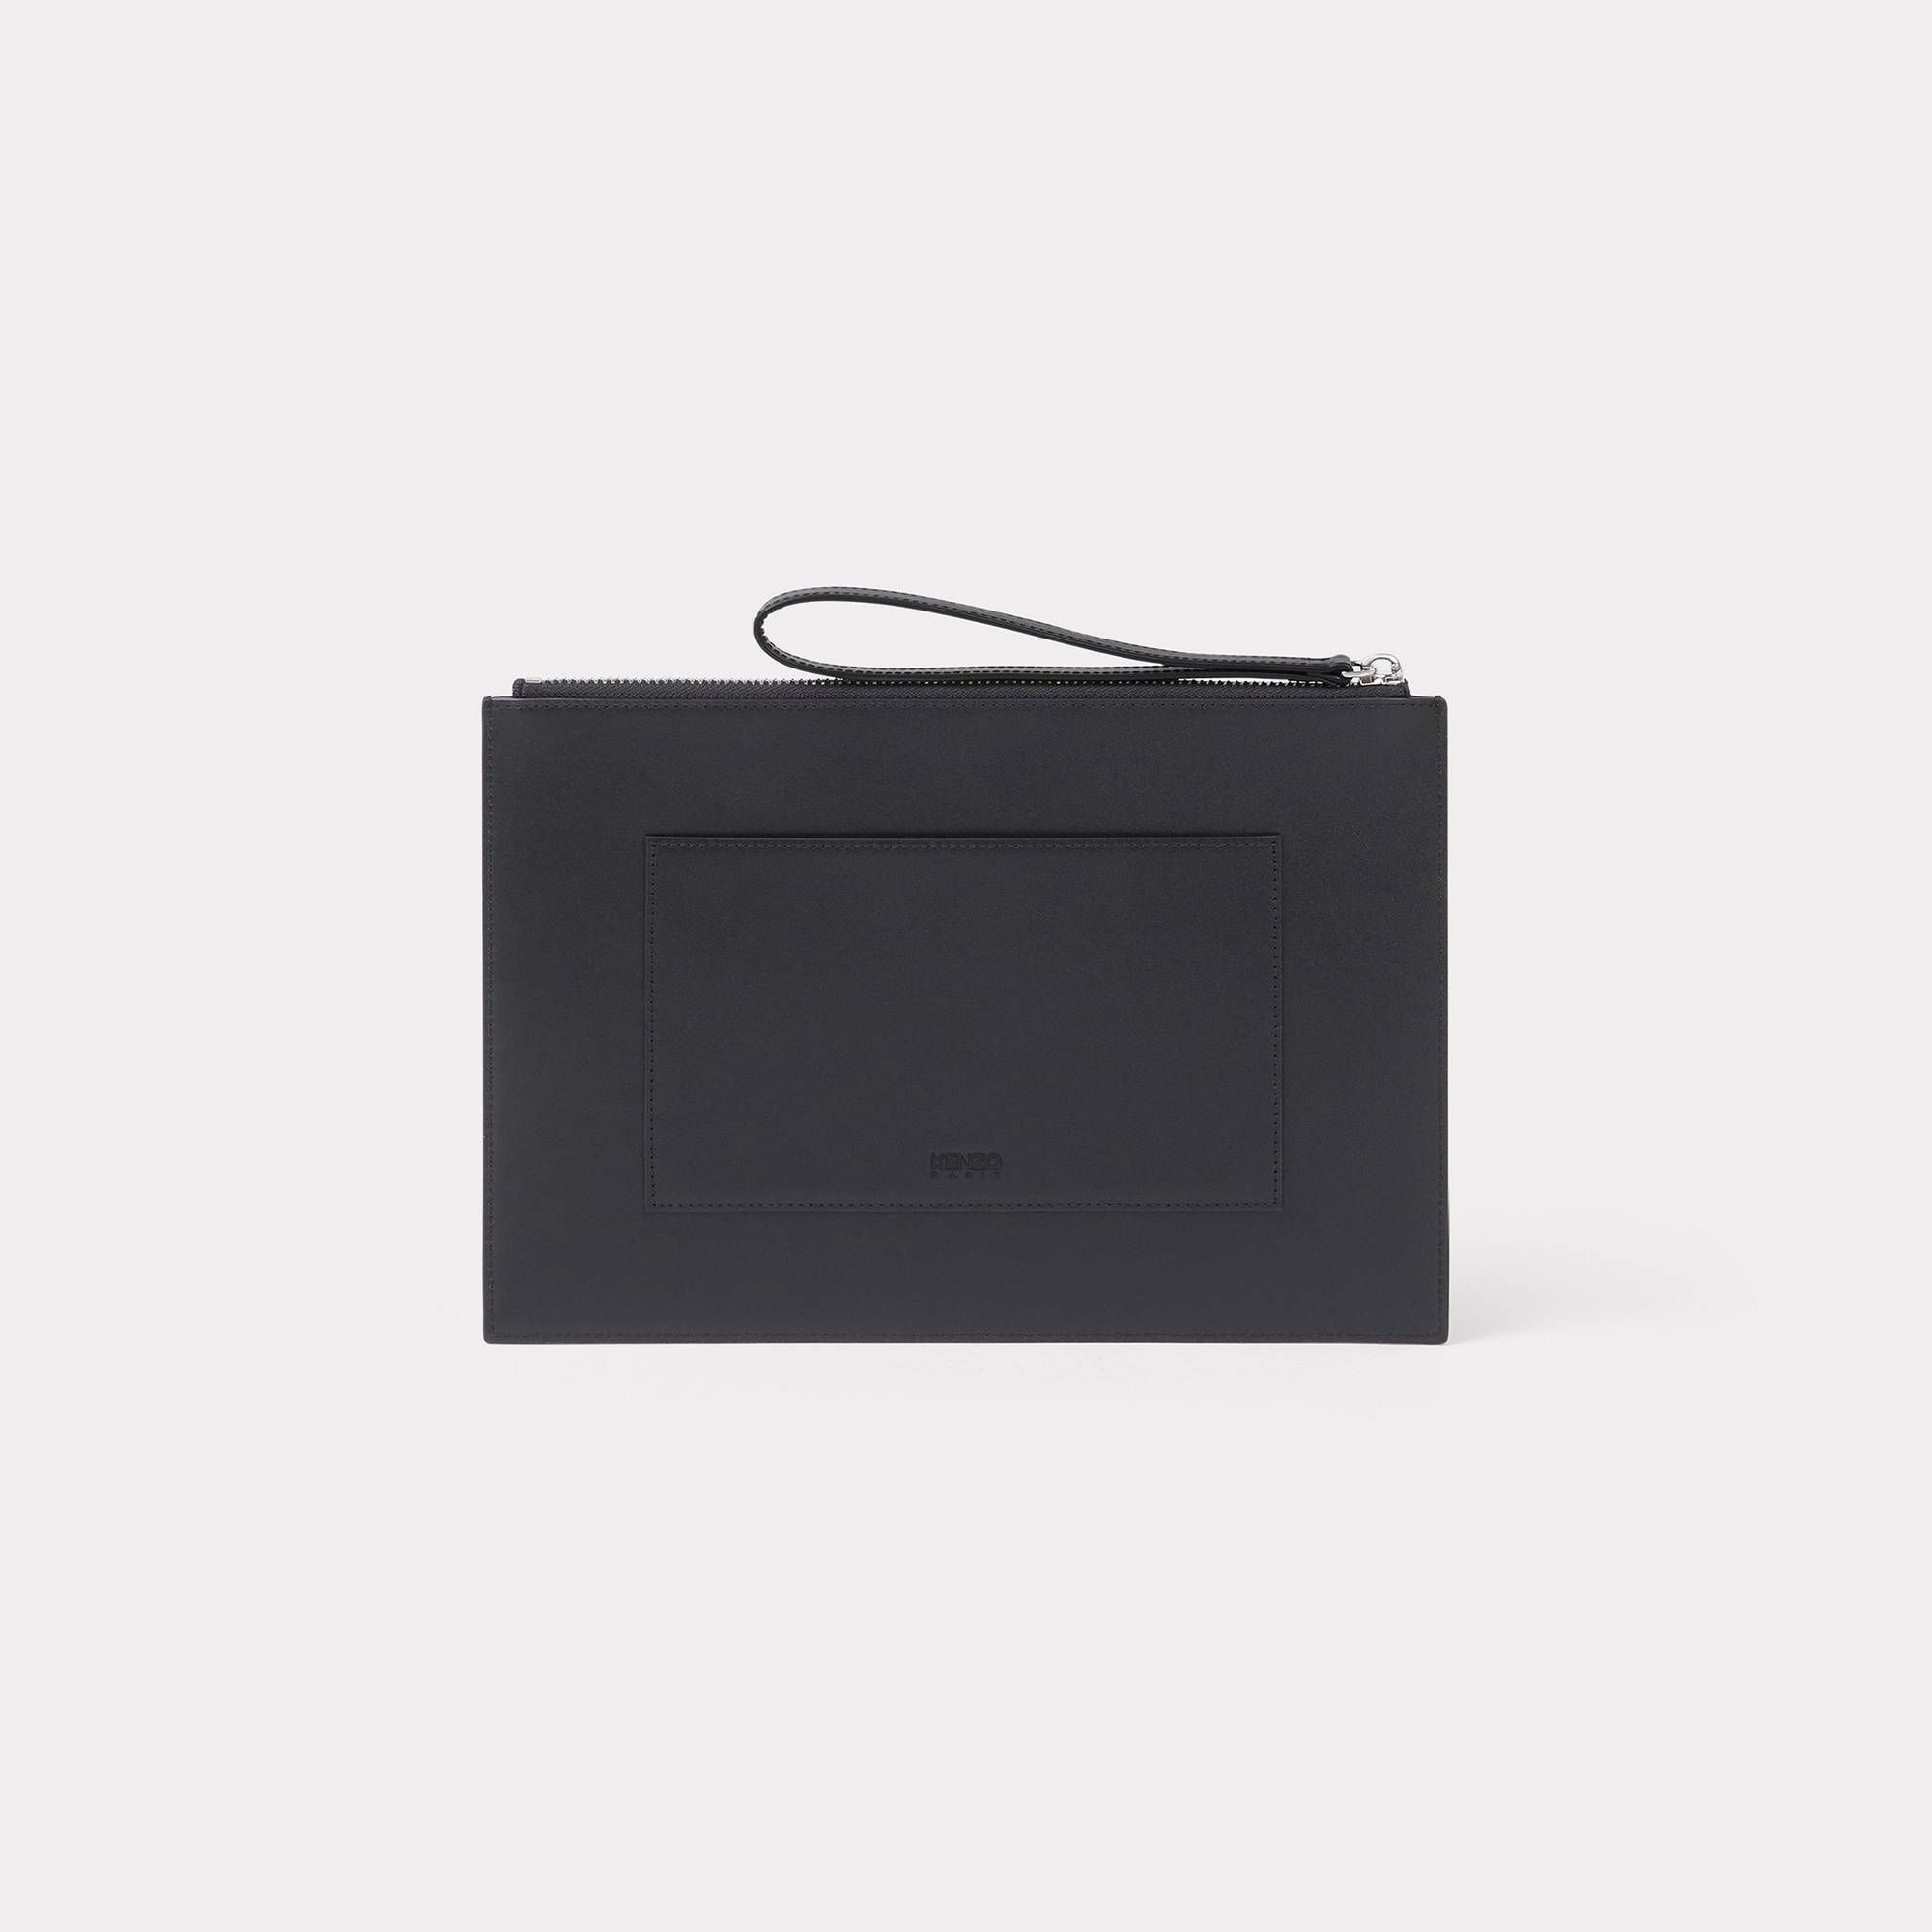  'KENZO Emboss' Large Leather Clutch - Black 